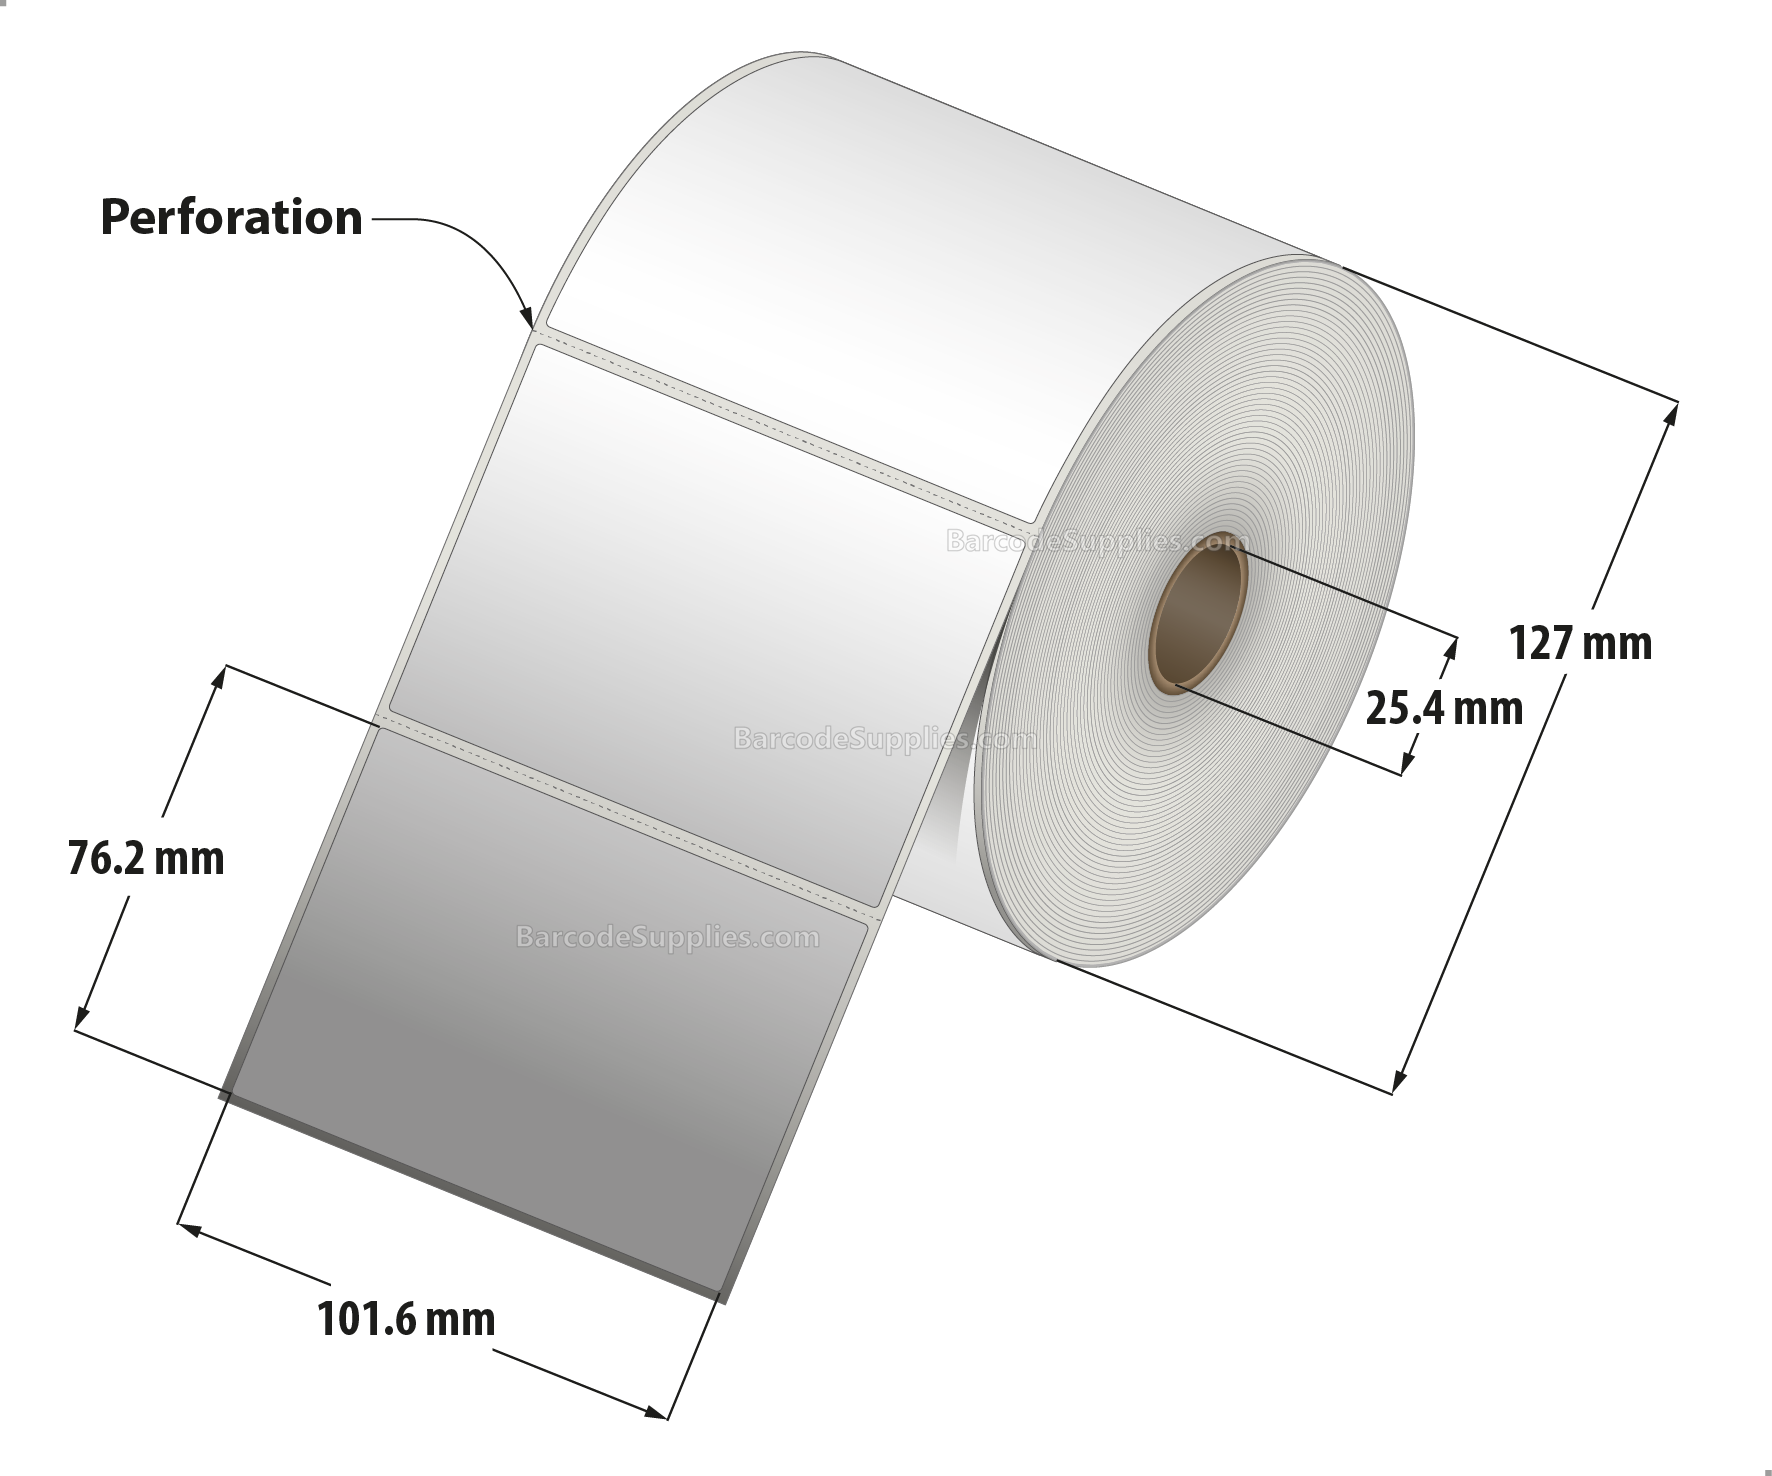 4 x 3 Direct Thermal White Labels With Permanent Acrylic Adhesive - Perforated - 850 Labels Per Roll - Carton Of 4 Rolls - 3400 Labels Total - MPN: DT43-15PDT